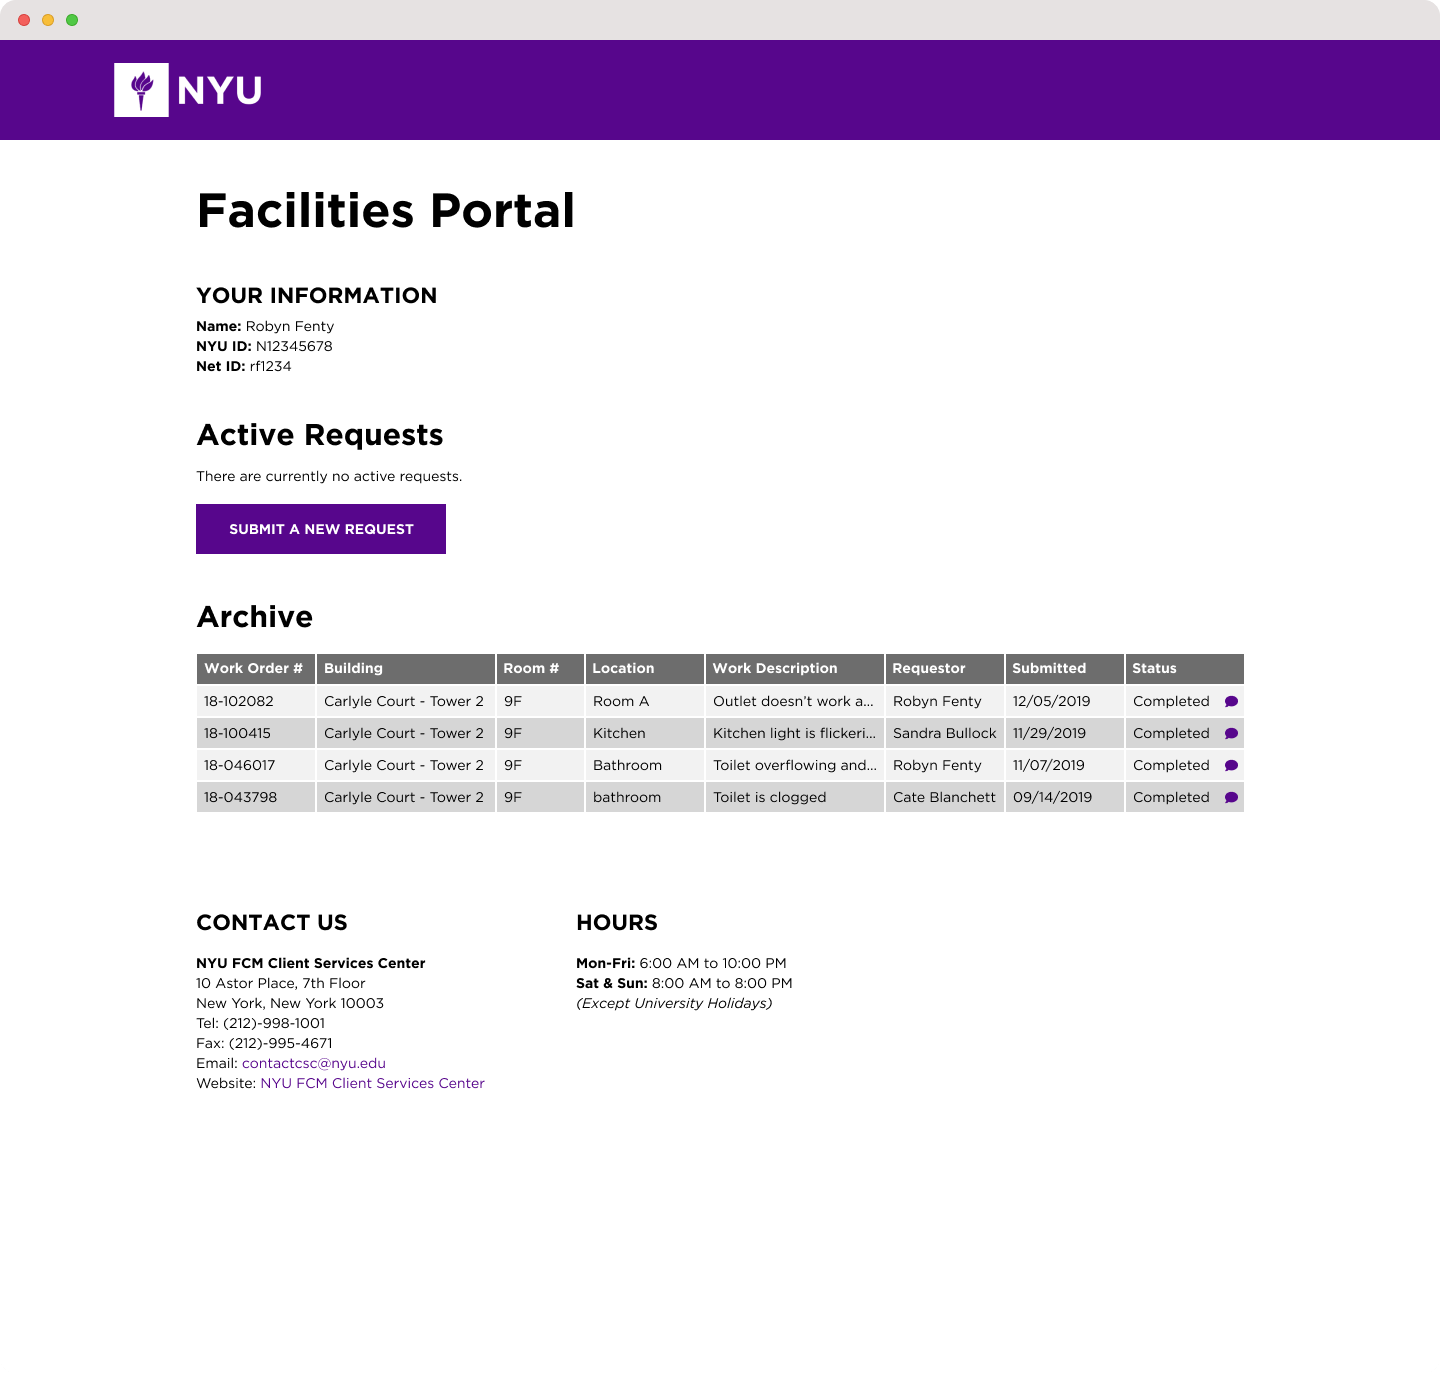 Web mockup of NYU Facilities Portal with no current active requests